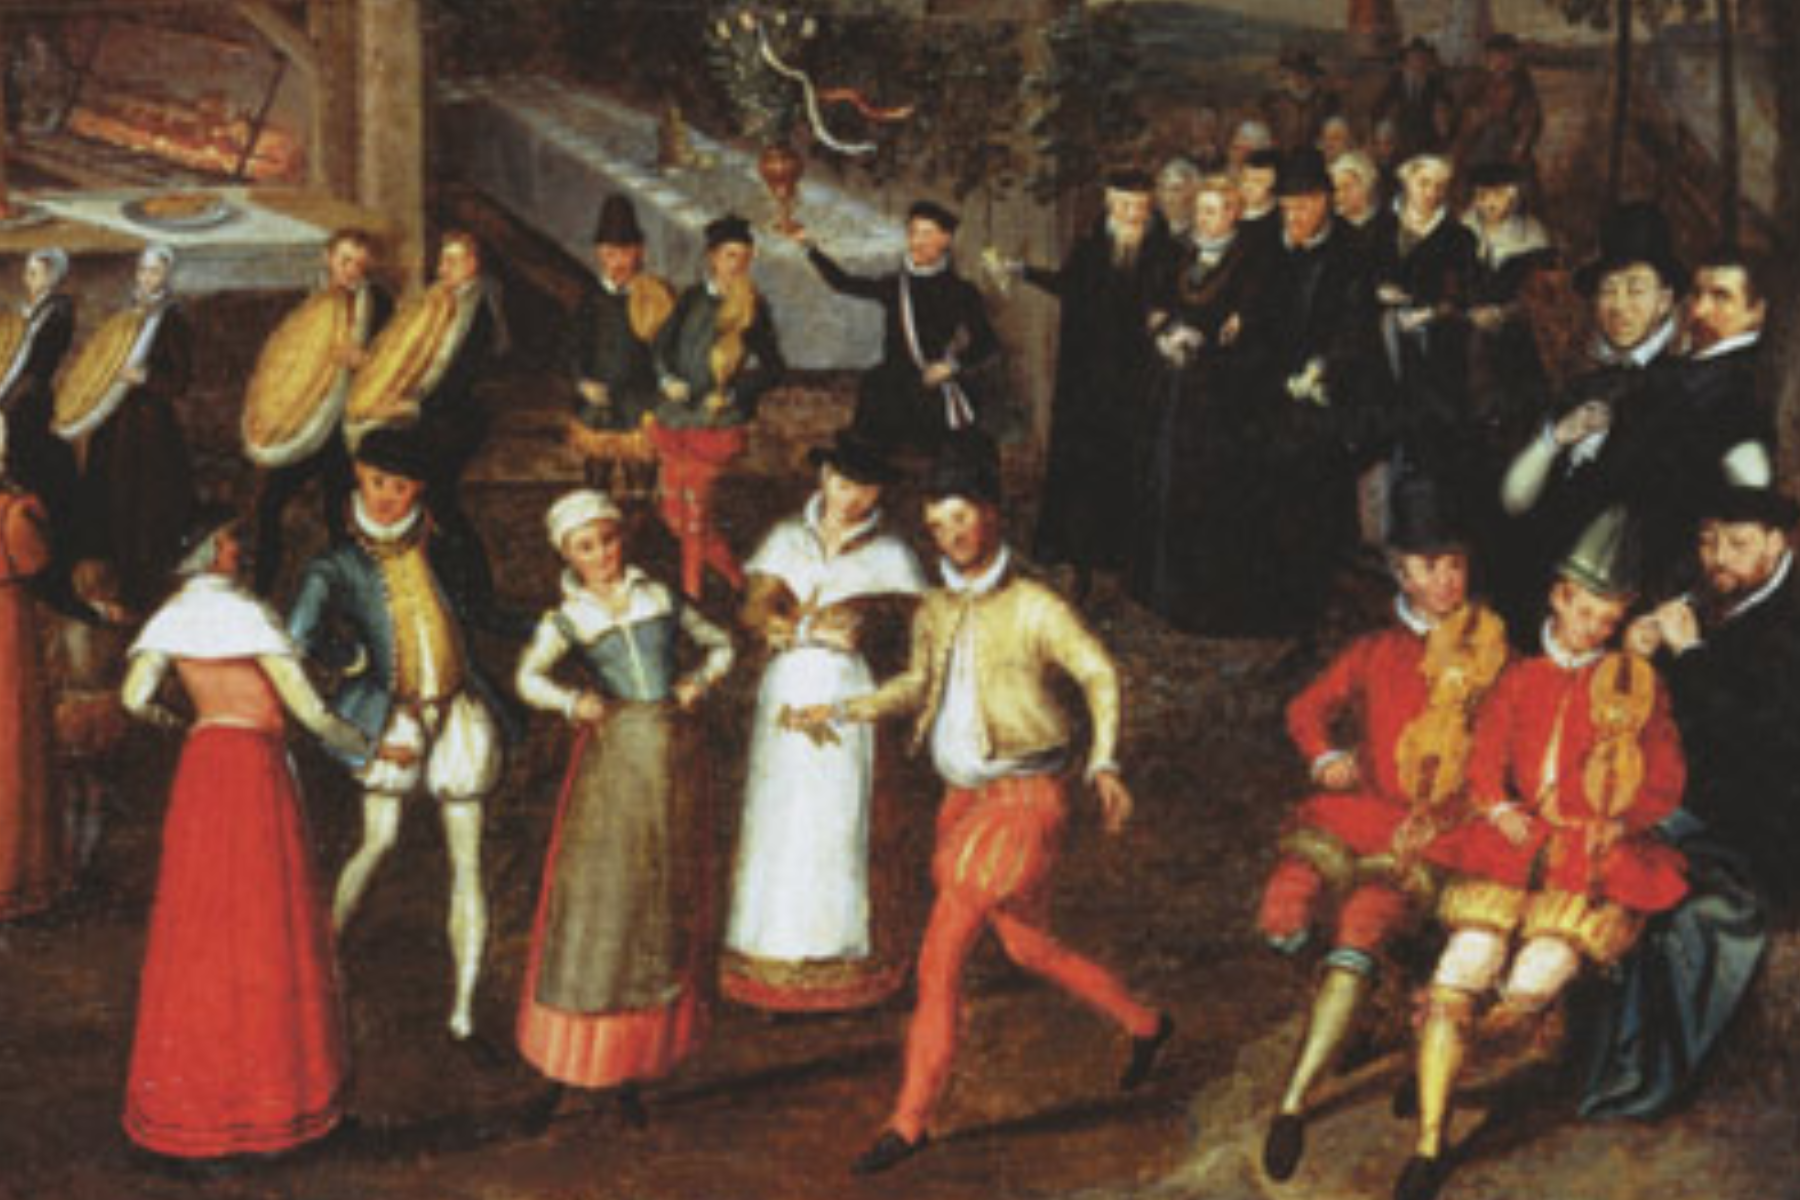 Marriage ceremony in the Renaissance period